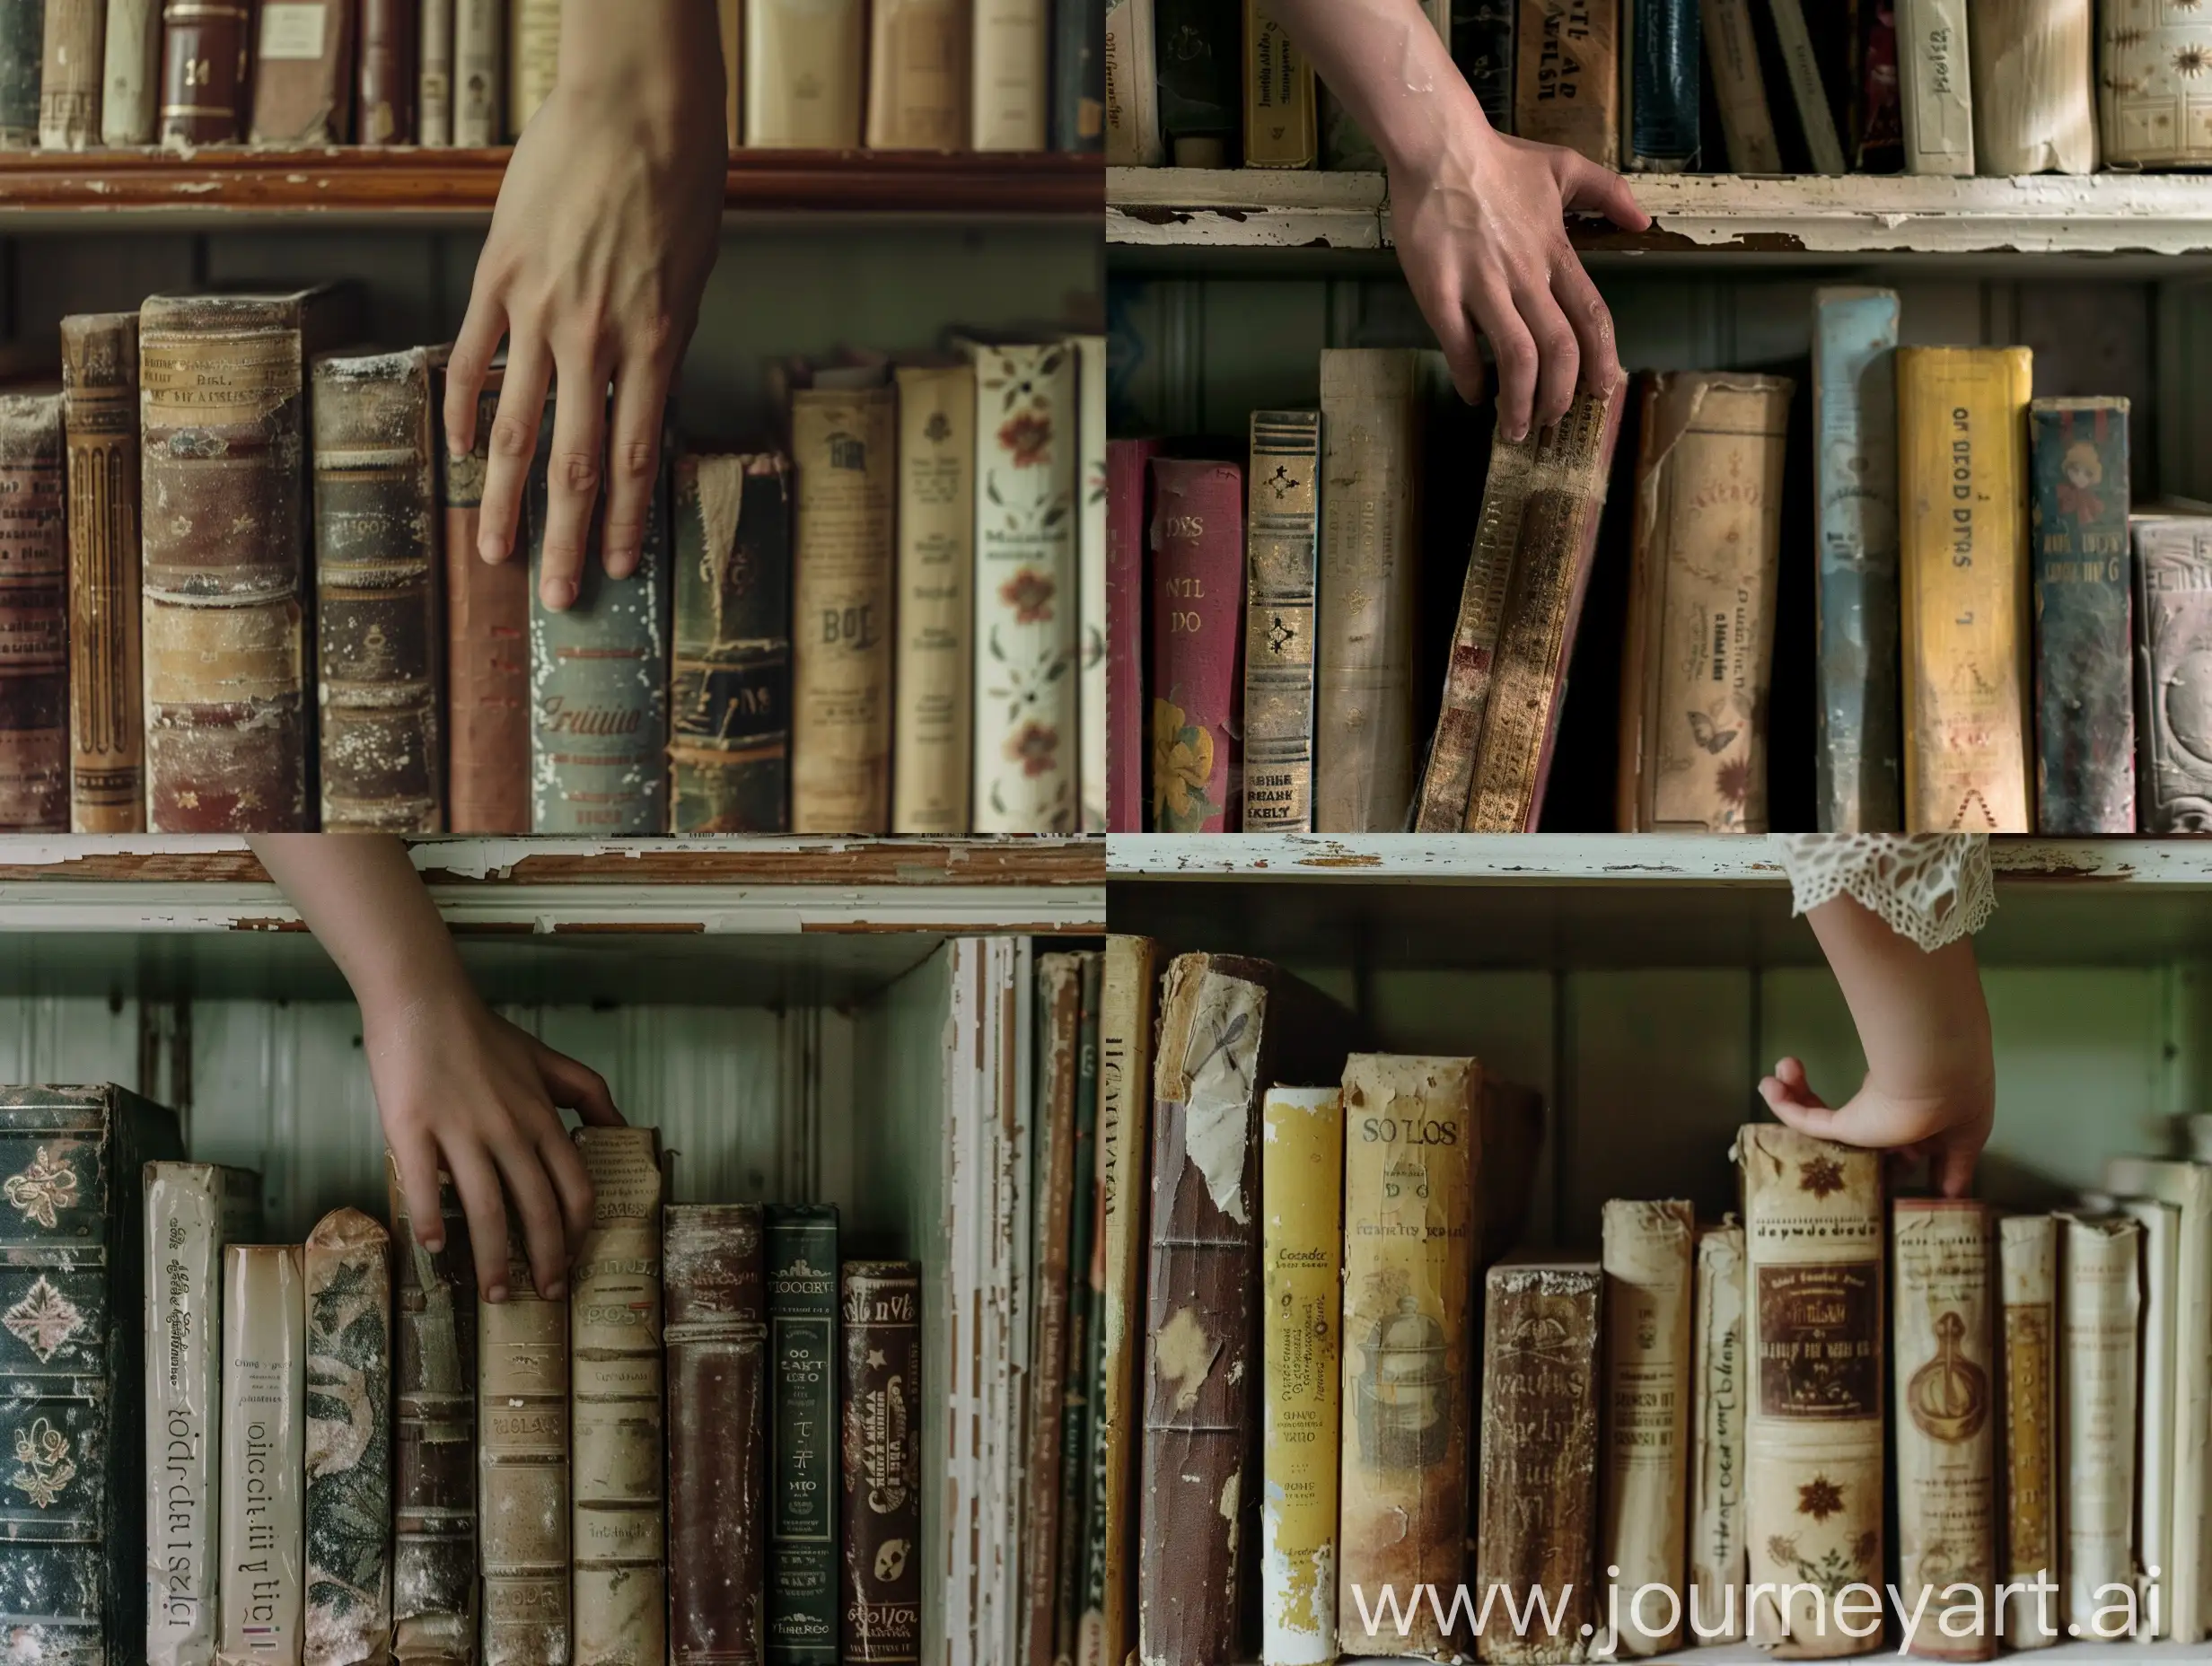  Film a close-up shot of a teenage girl hand hesitating above the dusty cookbooks on the kitchen shelves, This shot represents the ]girls inner conflict as they grapple with the guilt of their actions, symbolized by the neglected cookbooks